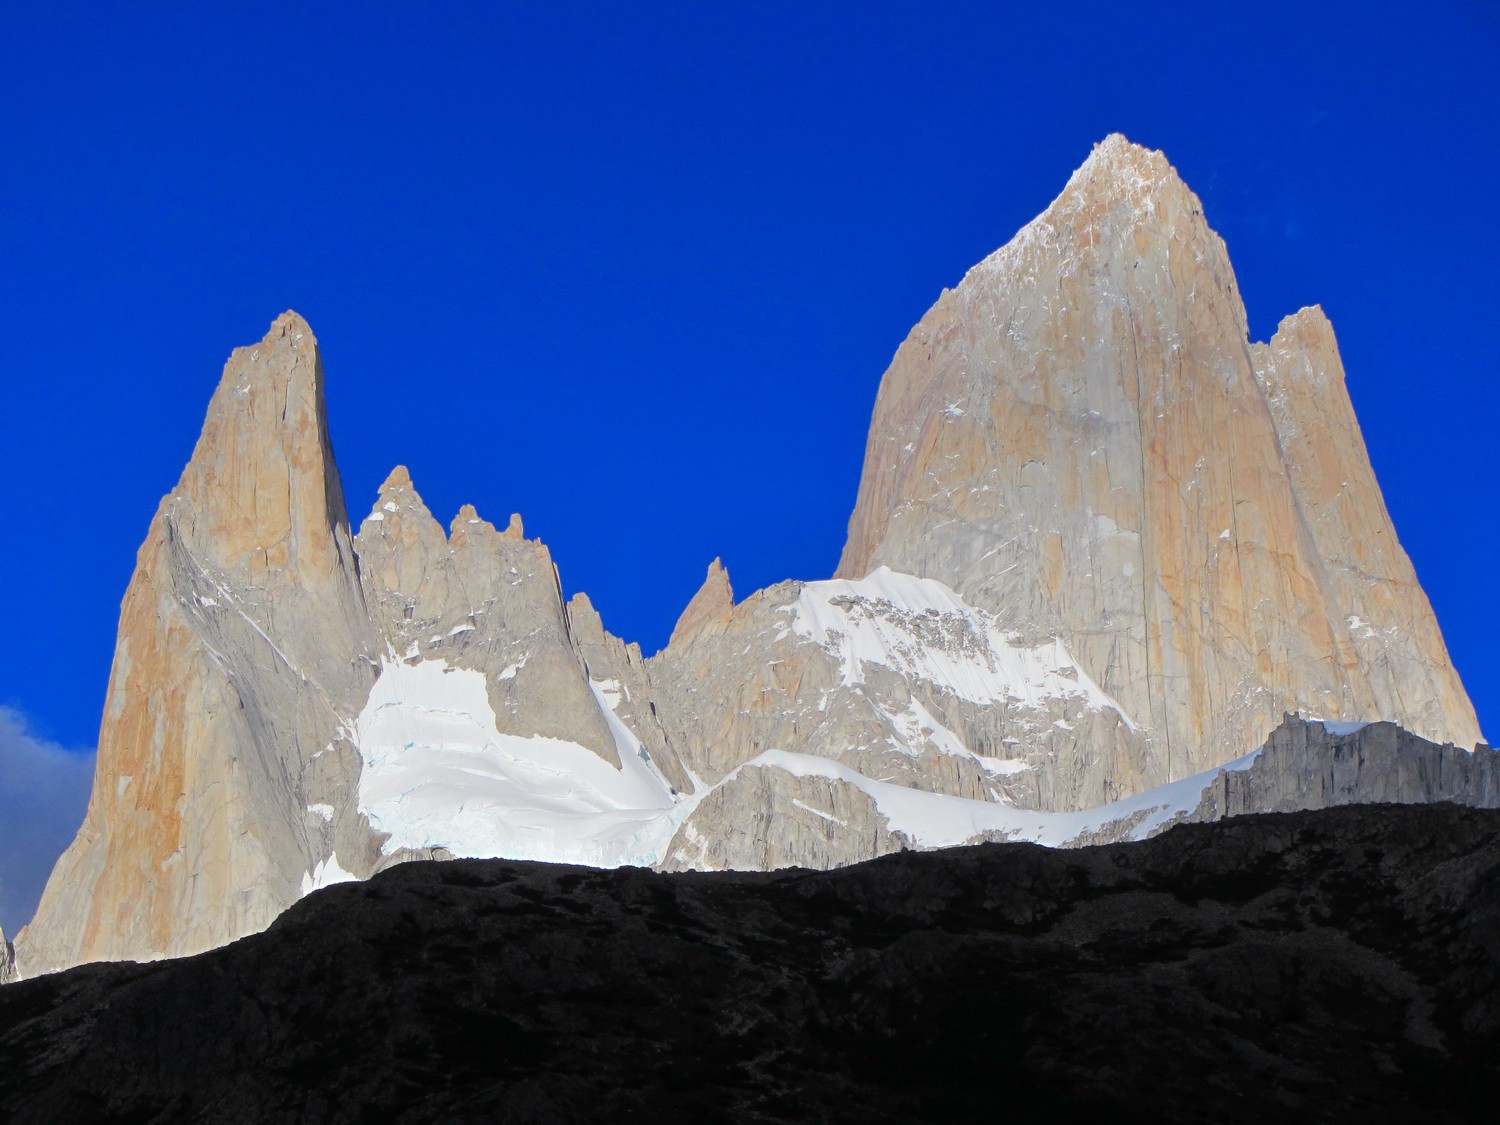 East faces of Cerro Poincenot and Cerro Fitz Roy in the morning light